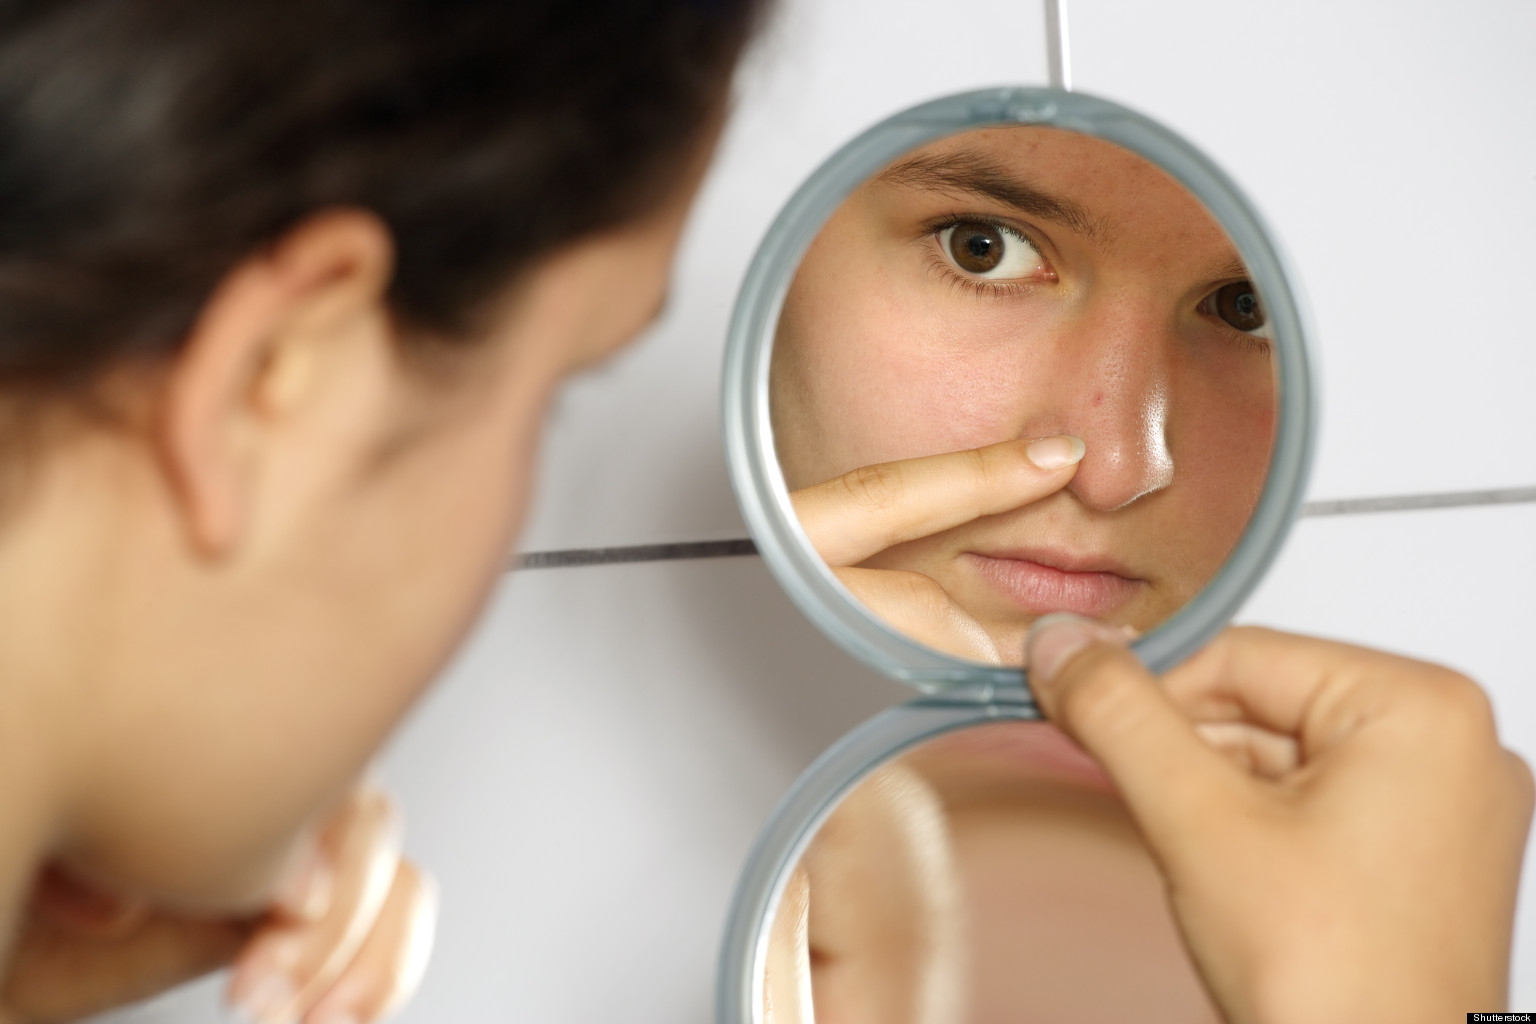 DSM-5: Body Dysmorphic Disorder Or Obsessed With ...